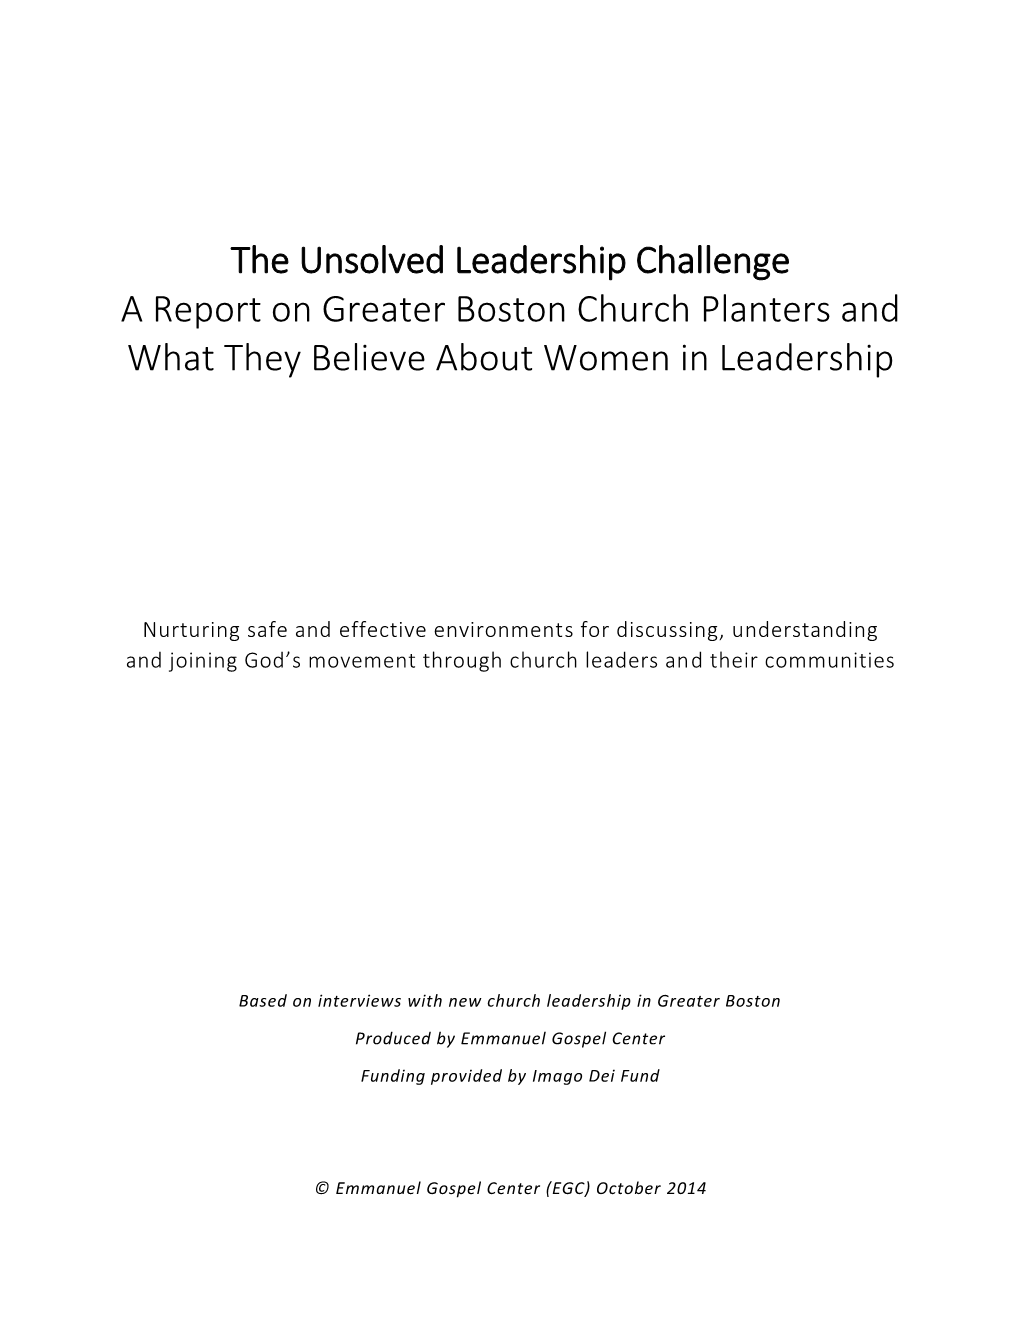 The Unsolved Leadership Challenge a Report on Greater Boston Church Planters and What They Believe About Women in Leadership